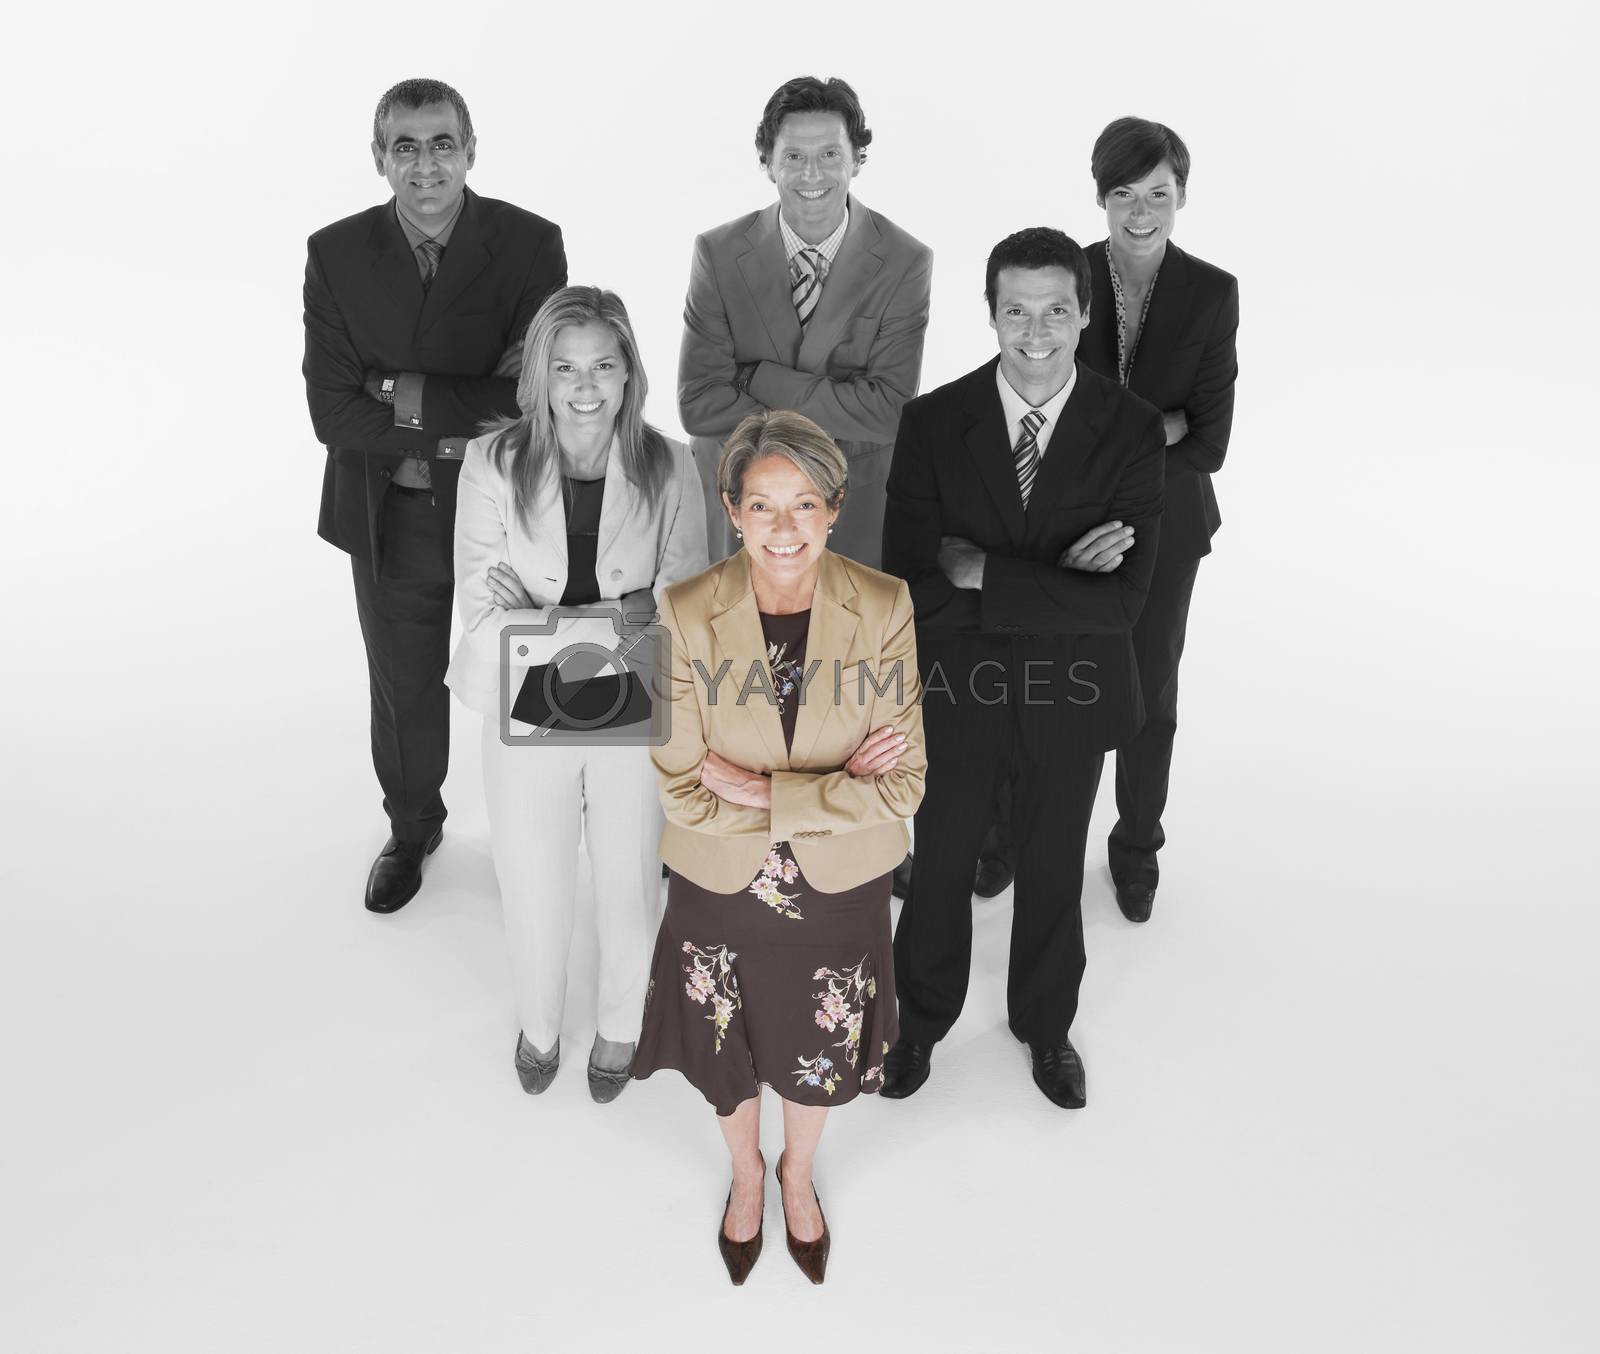 Royalty free image of Ambitious businesswoman with team of professionals against white background by moodboard